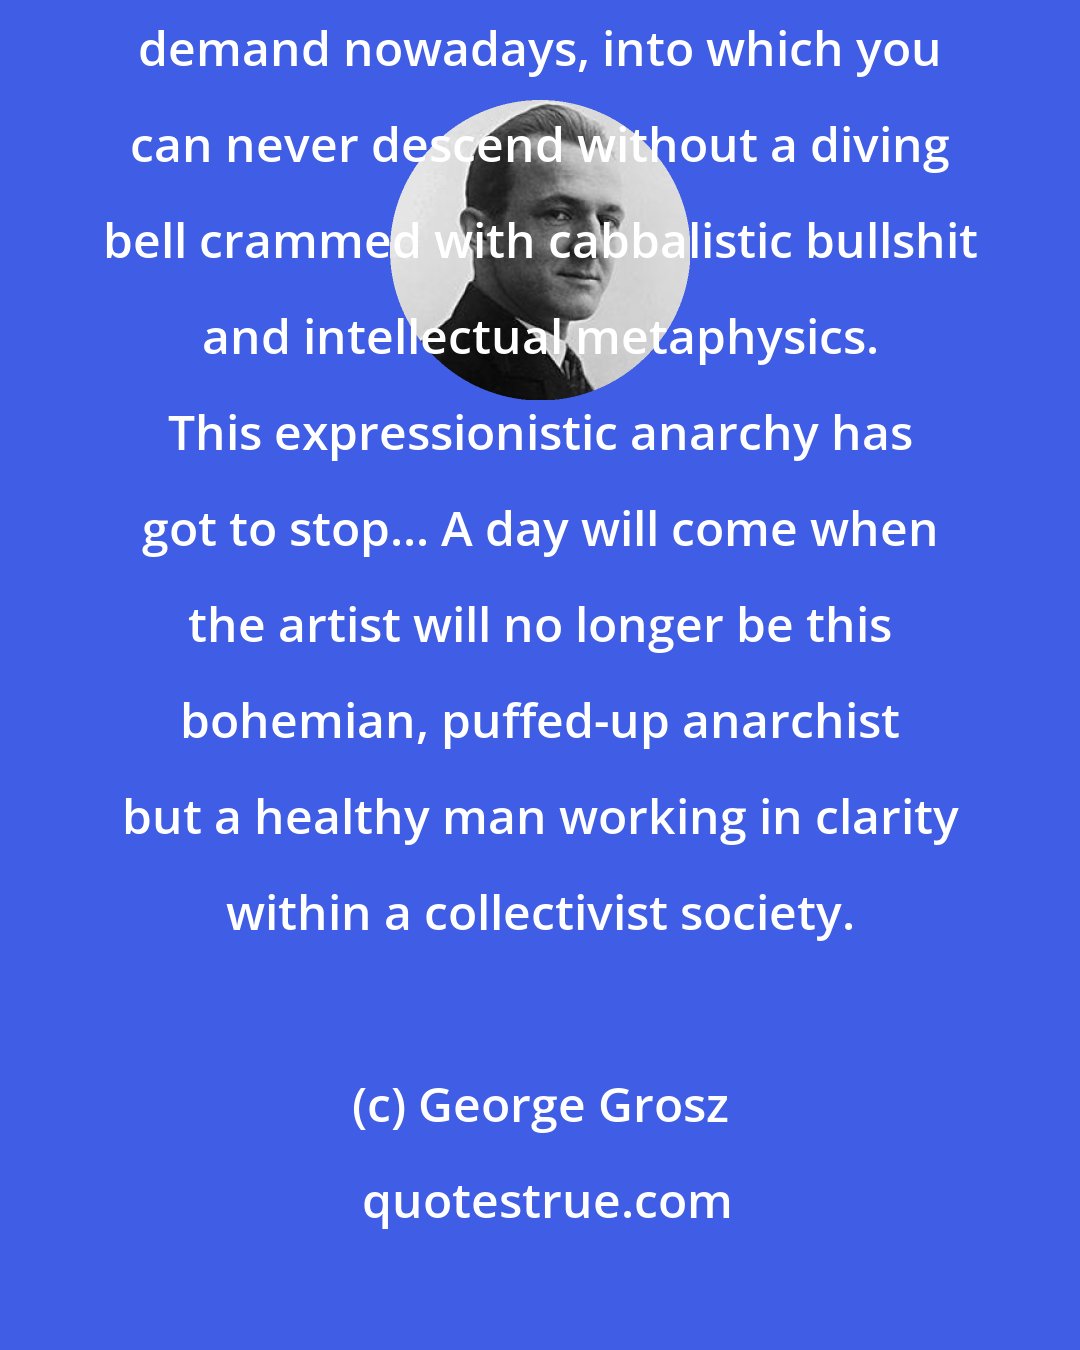 George Grosz: My aim is to be understood by everyone. I reject the 'depth' that people demand nowadays, into which you can never descend without a diving bell crammed with cabbalistic bullshit and intellectual metaphysics. This expressionistic anarchy has got to stop... A day will come when the artist will no longer be this bohemian, puffed-up anarchist but a healthy man working in clarity within a collectivist society.